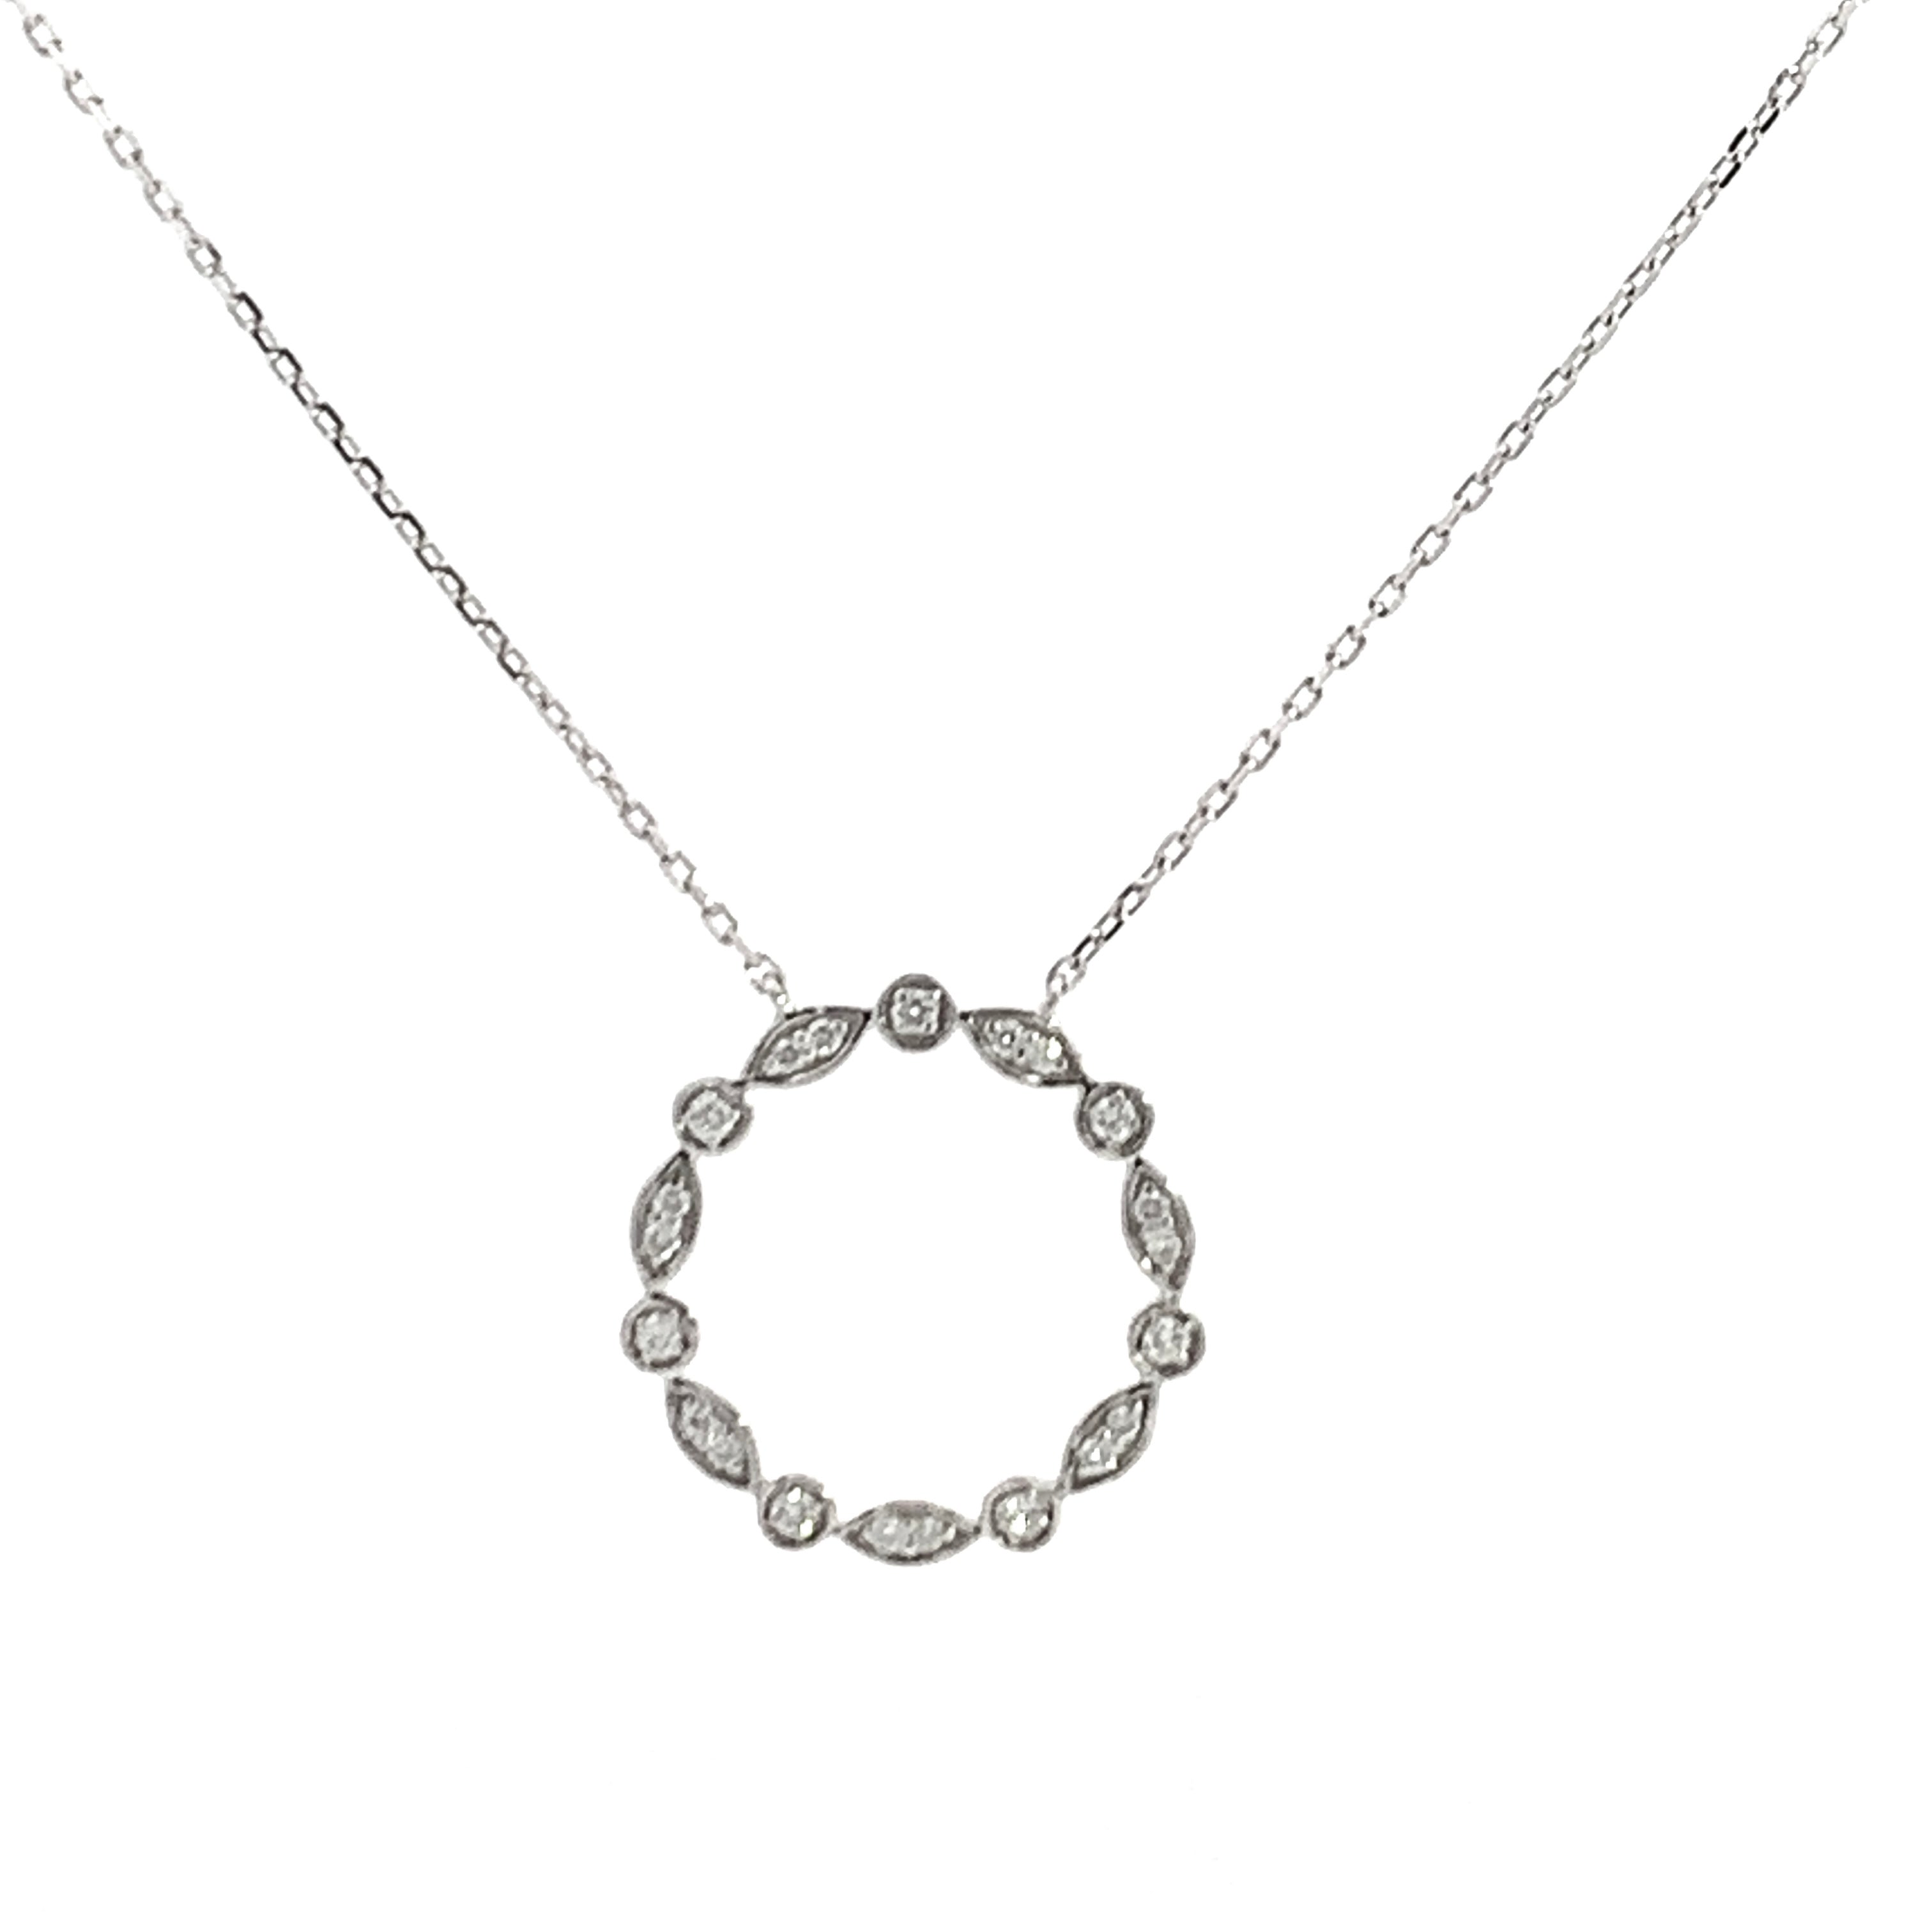 The Intricate Circle Necklace- 50% OFF!